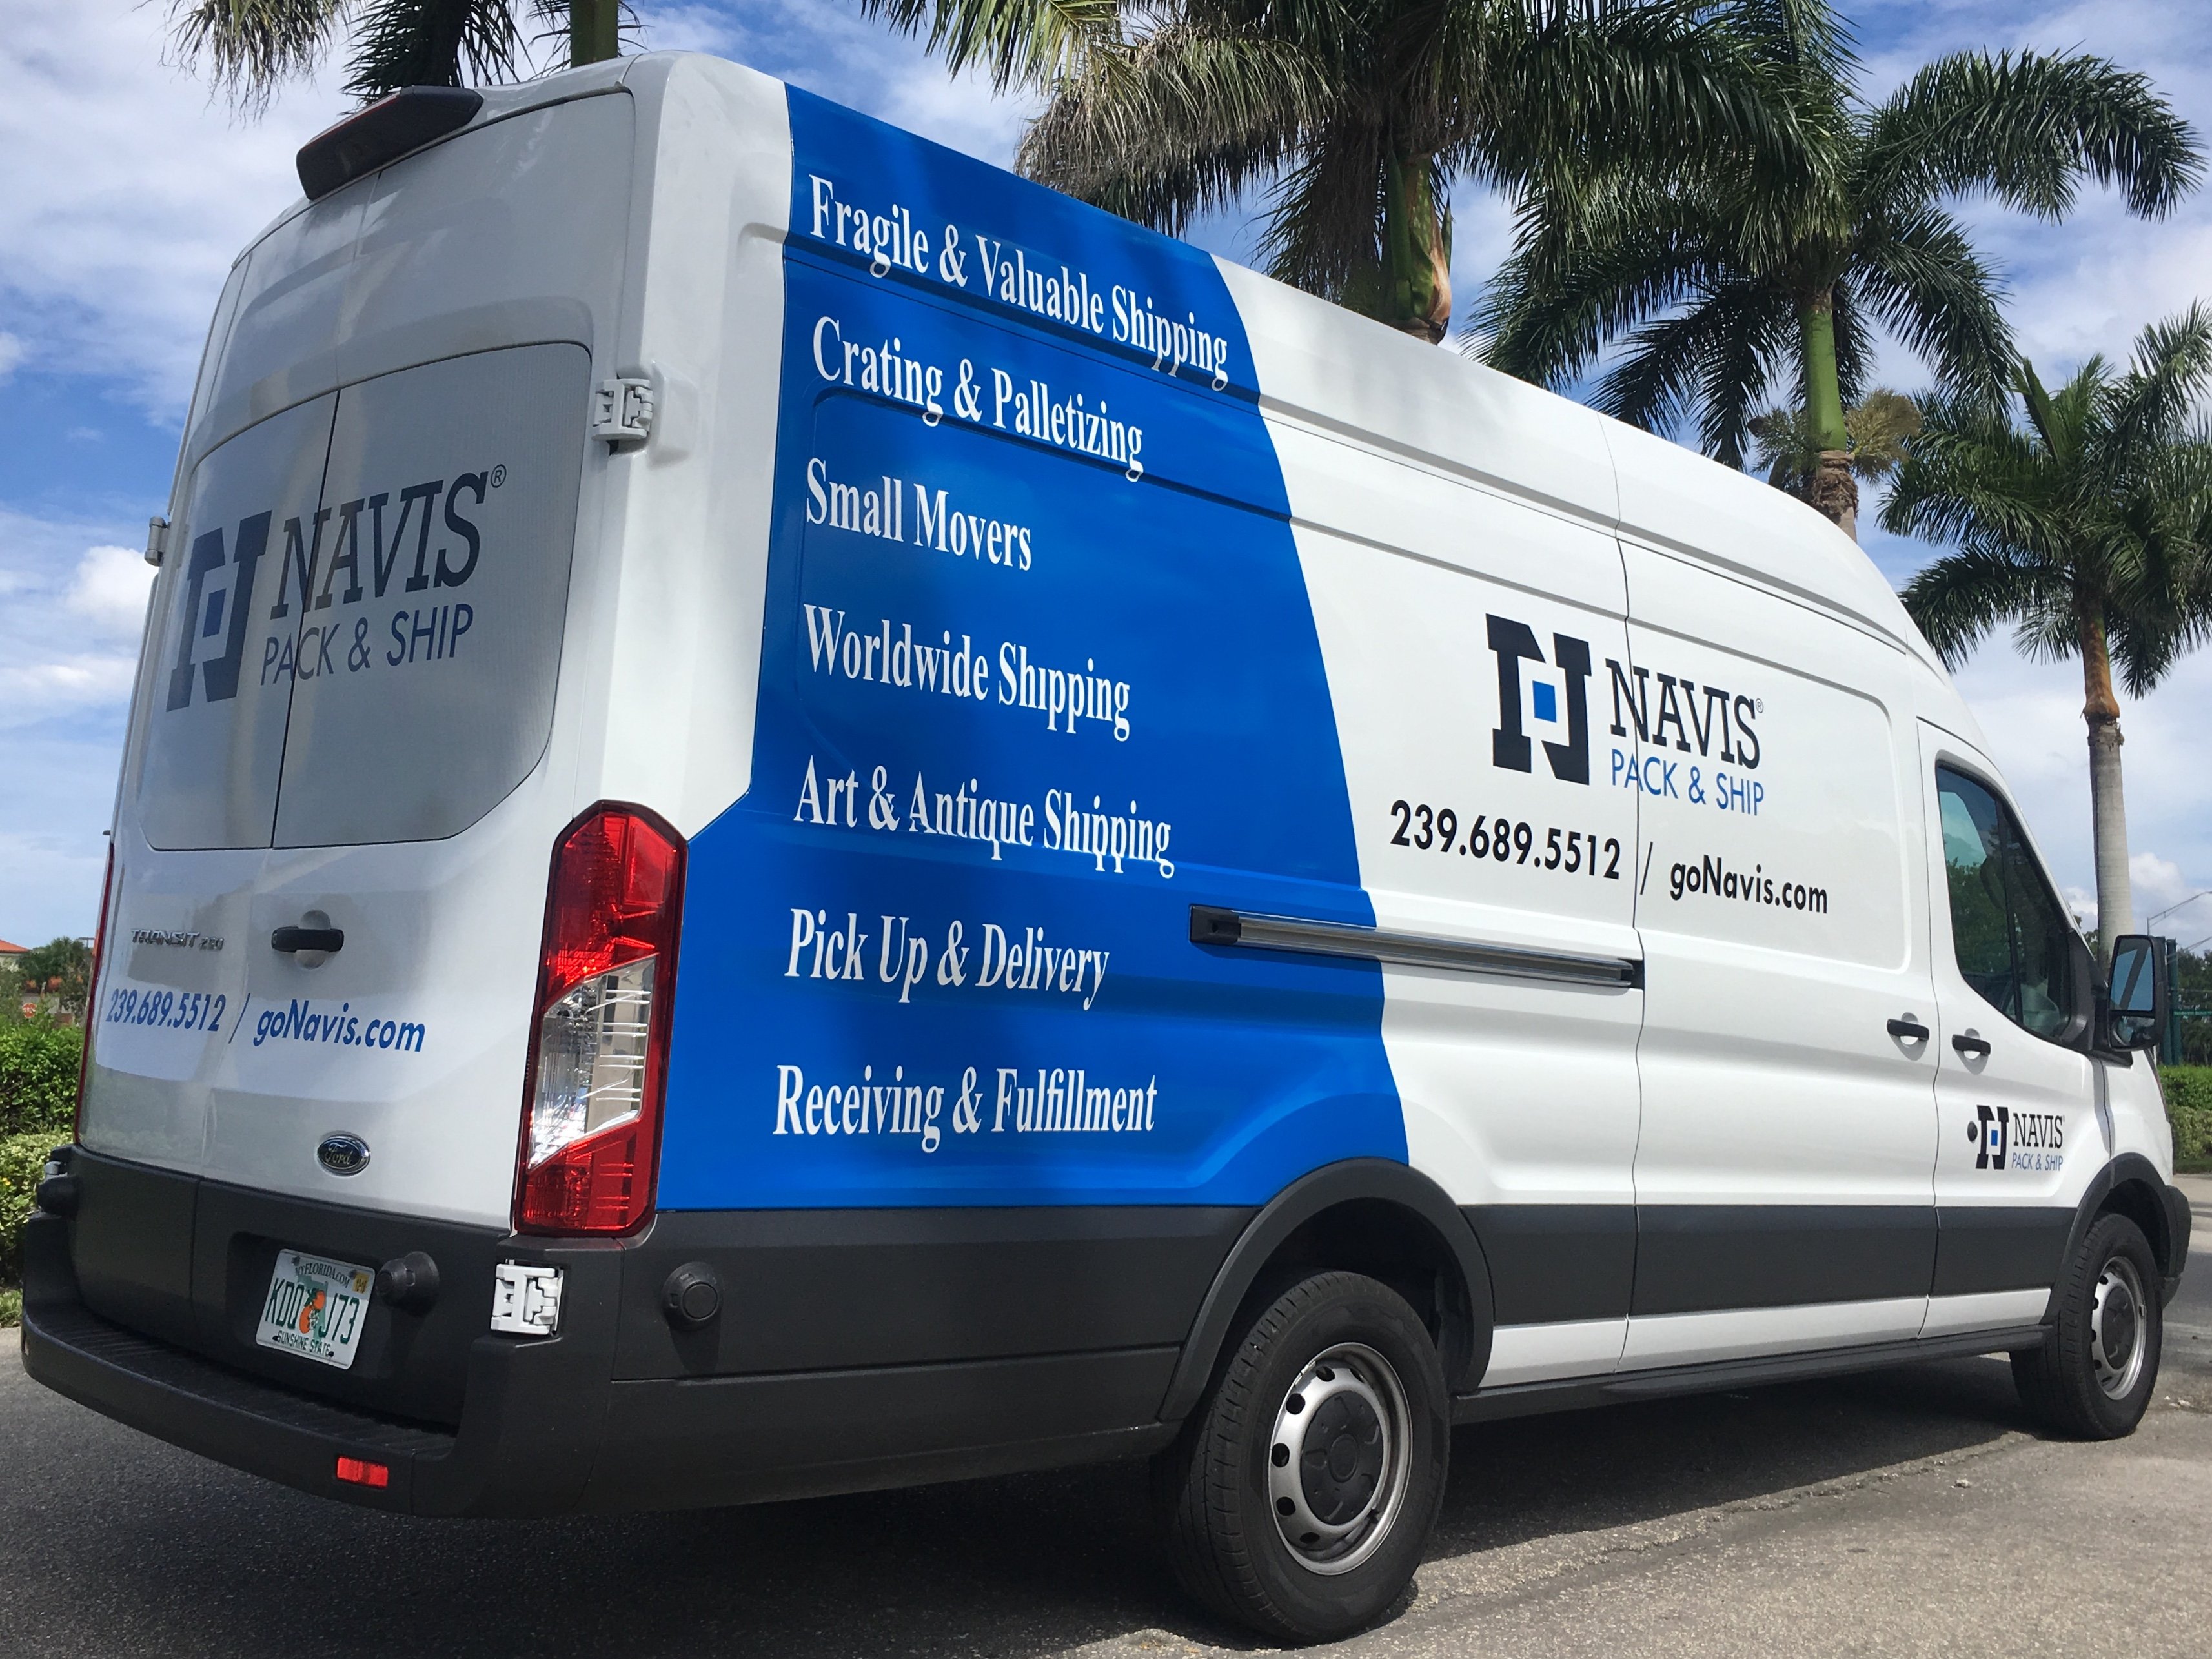 Pack and Ship Services in West Palm Beach, Palm Beach County and throughout South Florida